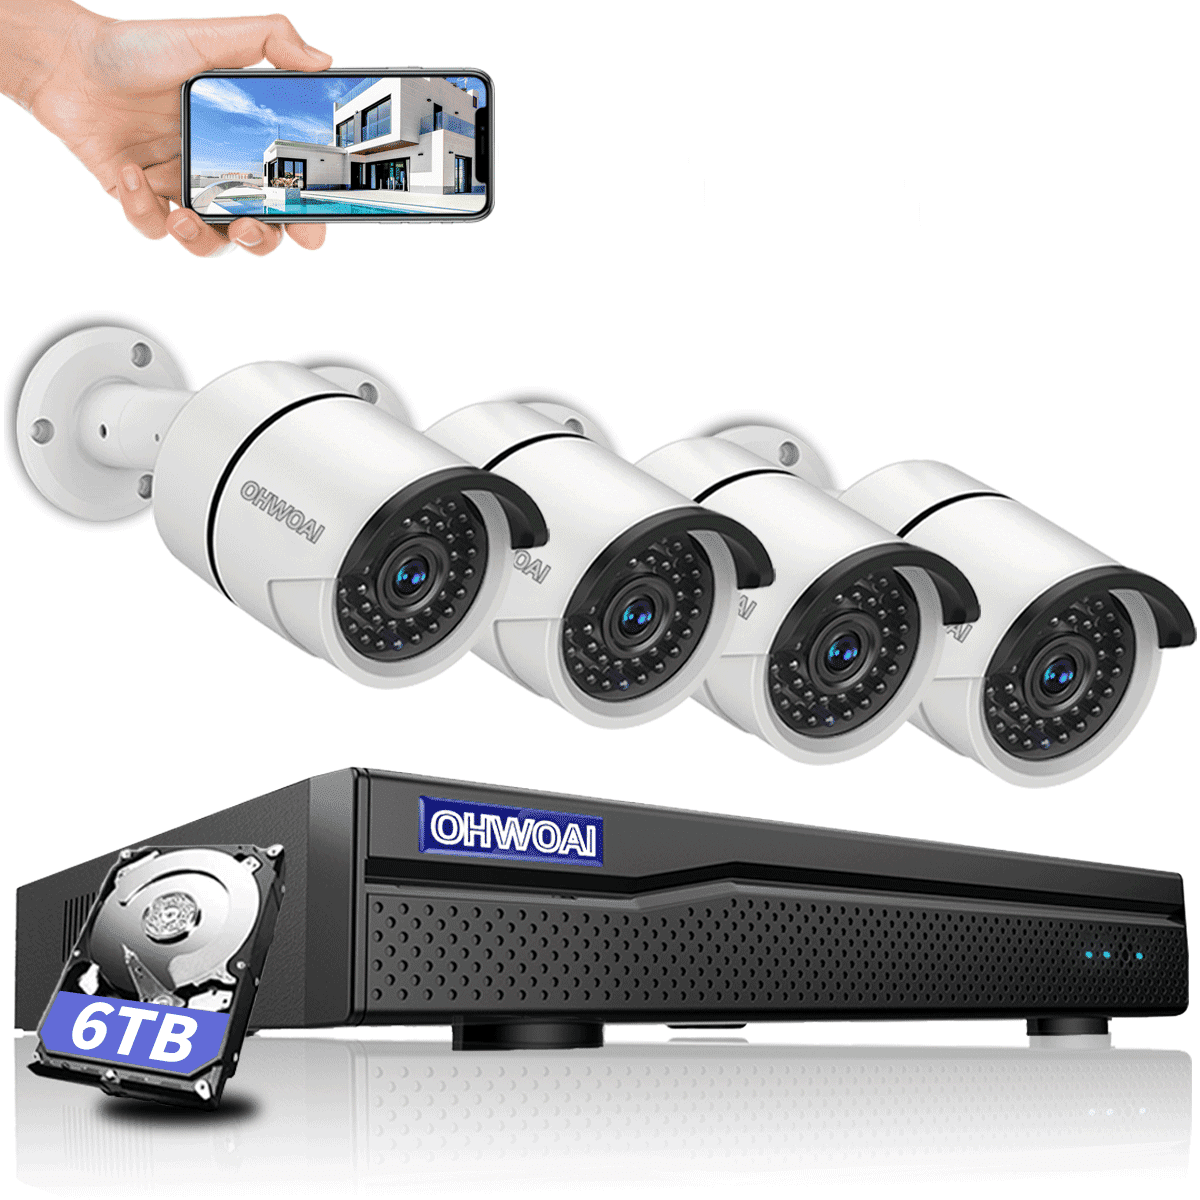 2TB Hard Drive 8CH 5MP H.265+ NVR and 8PCS 2MP Outdoor/Indoor PoE IP Cameras with 78ft Night Vision Customize Motion Detection Anlapus 8 Channel 1080P POE Security Camera System Remote Access 